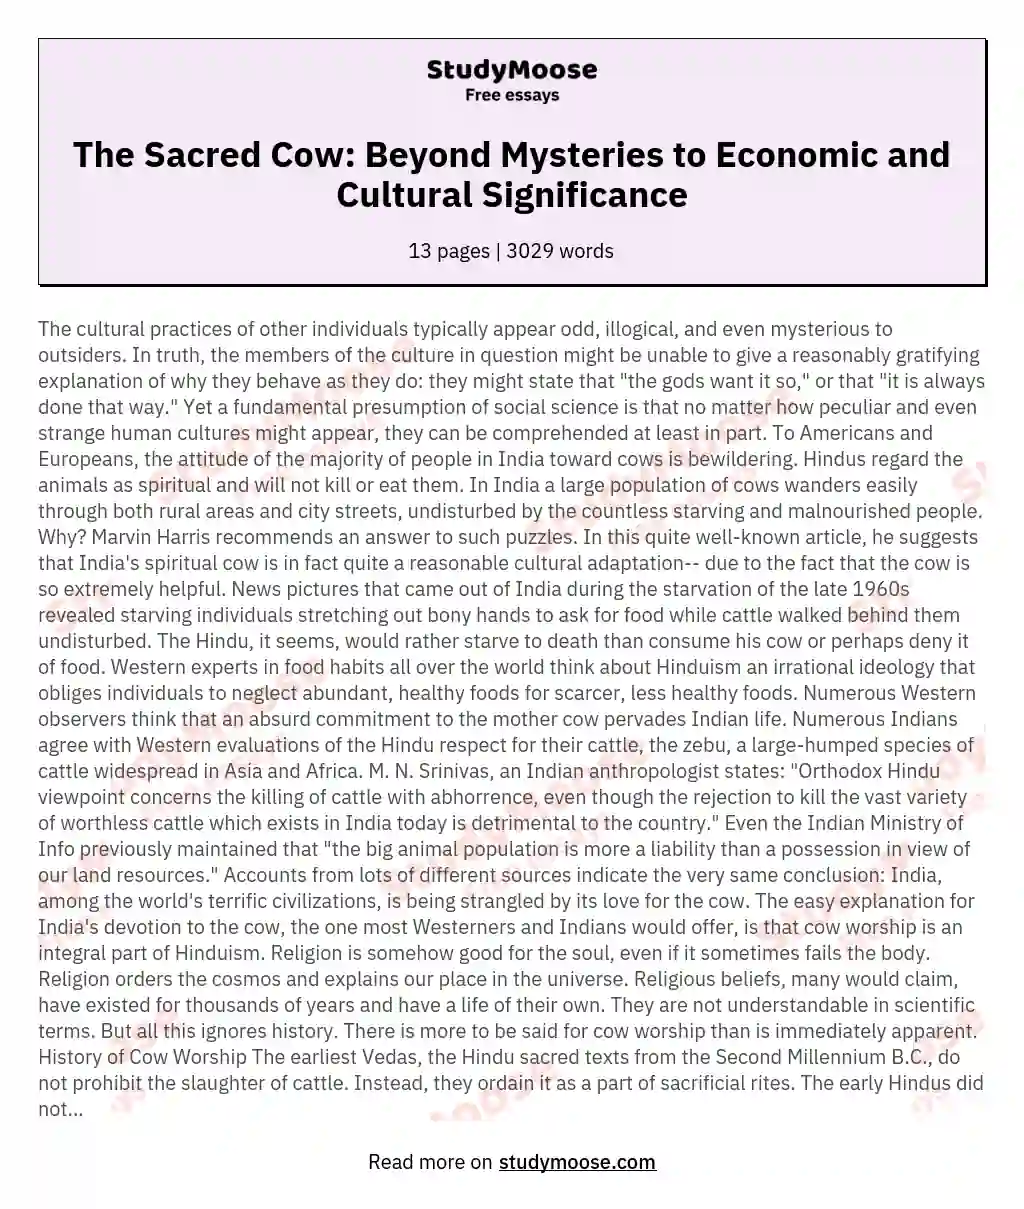 The Sacred Cow: Beyond Mysteries to Economic and Cultural Significance essay